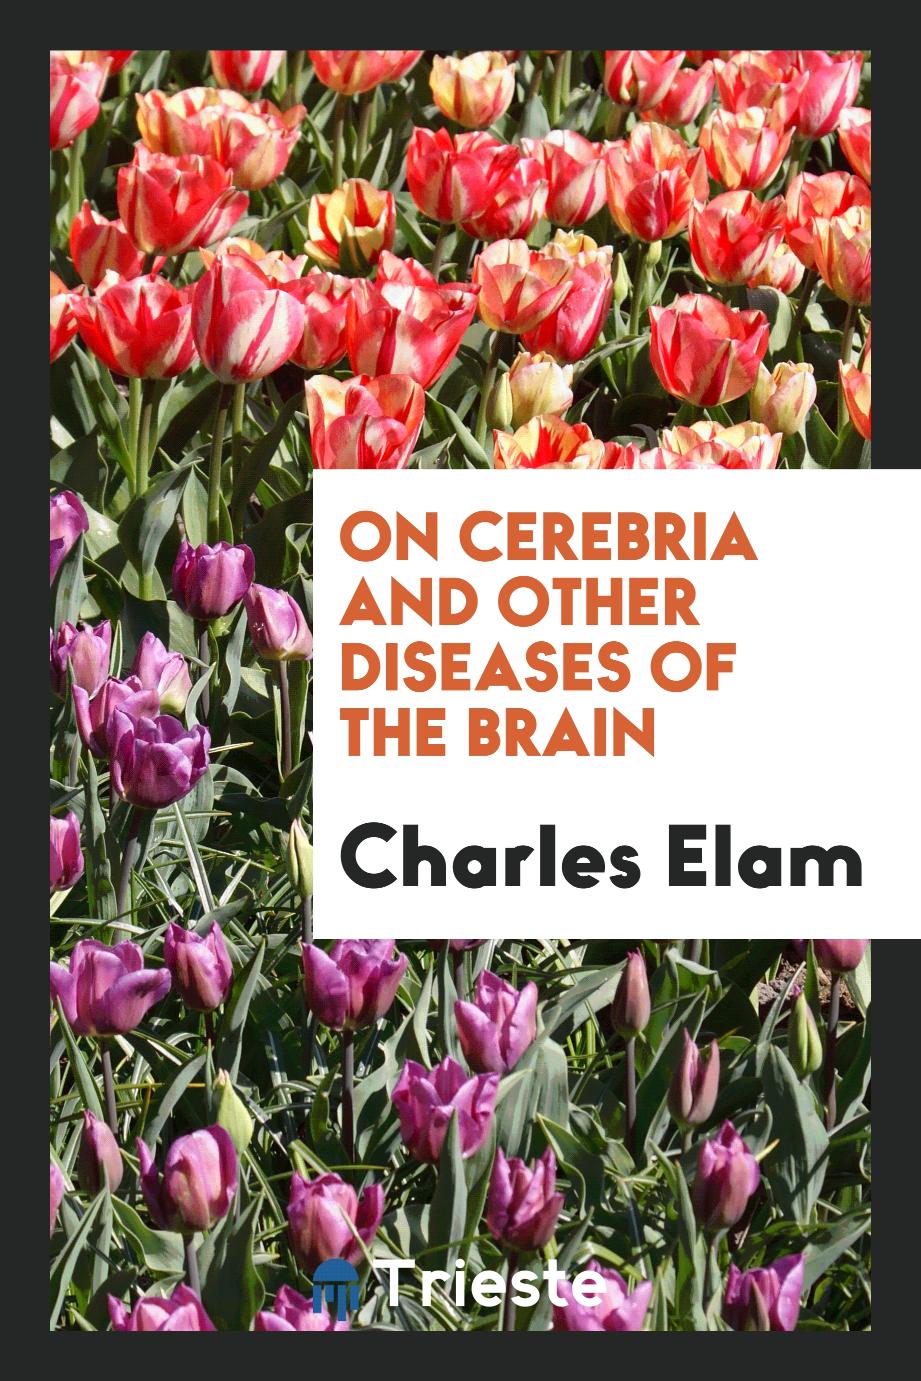 On Cerebria and Other Diseases of the Brain